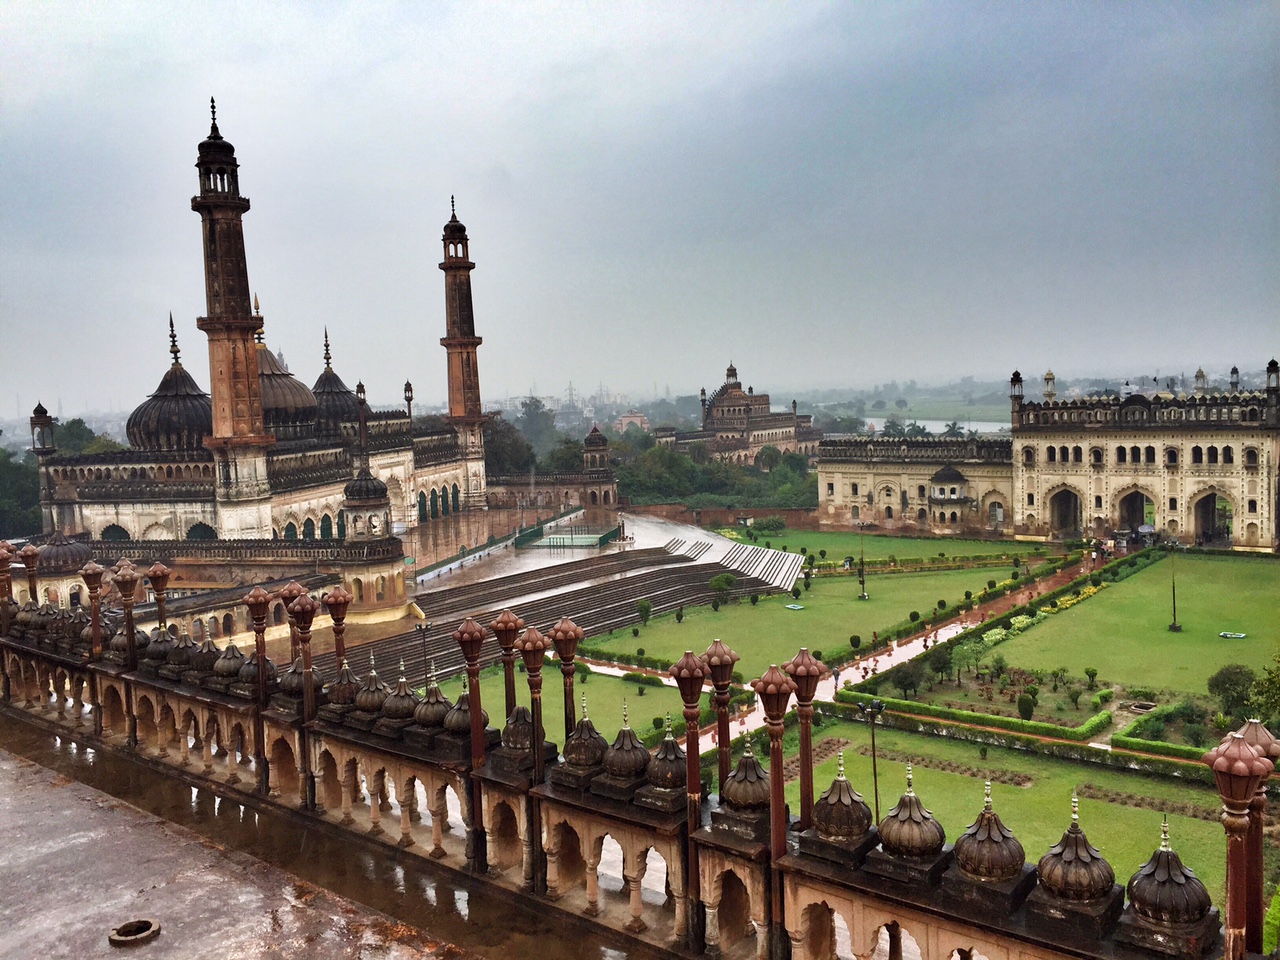 The magnificence of the Bara Imambara in Lucknow Media